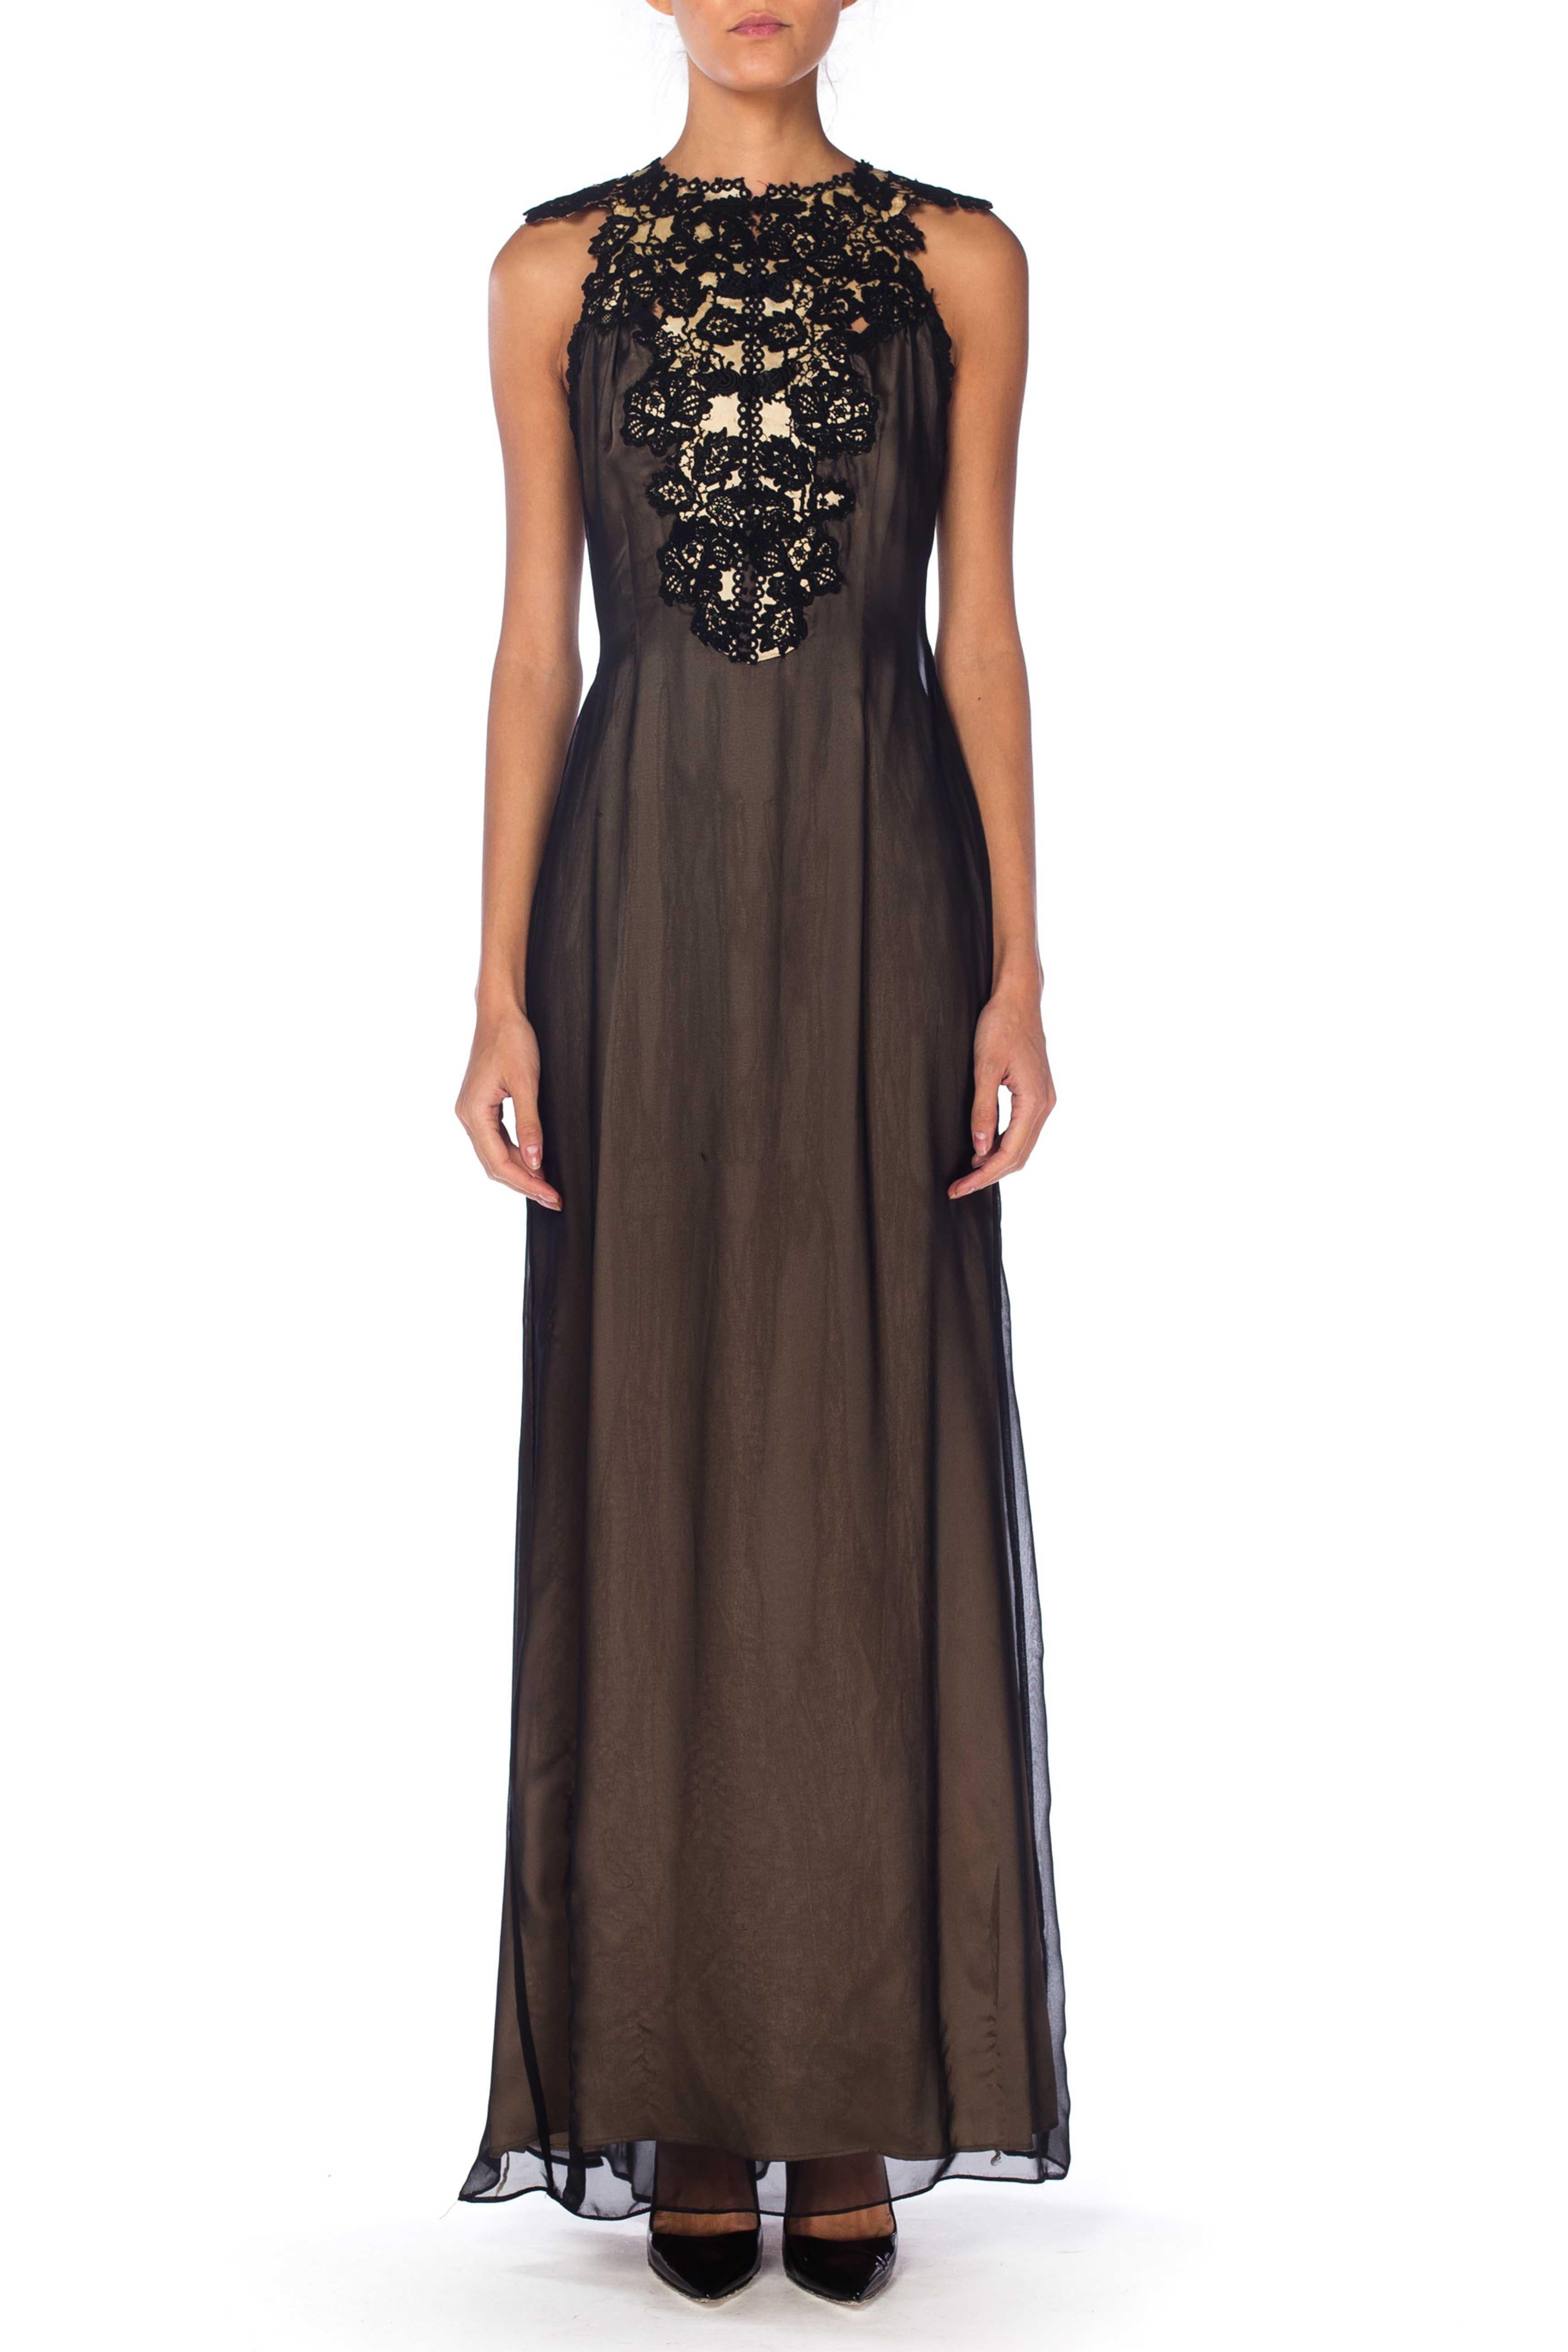 MORPHEW COLLECTION Black Silk & Poly Chiffon Gown With A Victorian Lace Collar
MORPHEW COLLECTION is made entirely by hand in our NYC Ateliér of rare antique materials sourced from around the globe. Our sustainable vintage materials represent over a